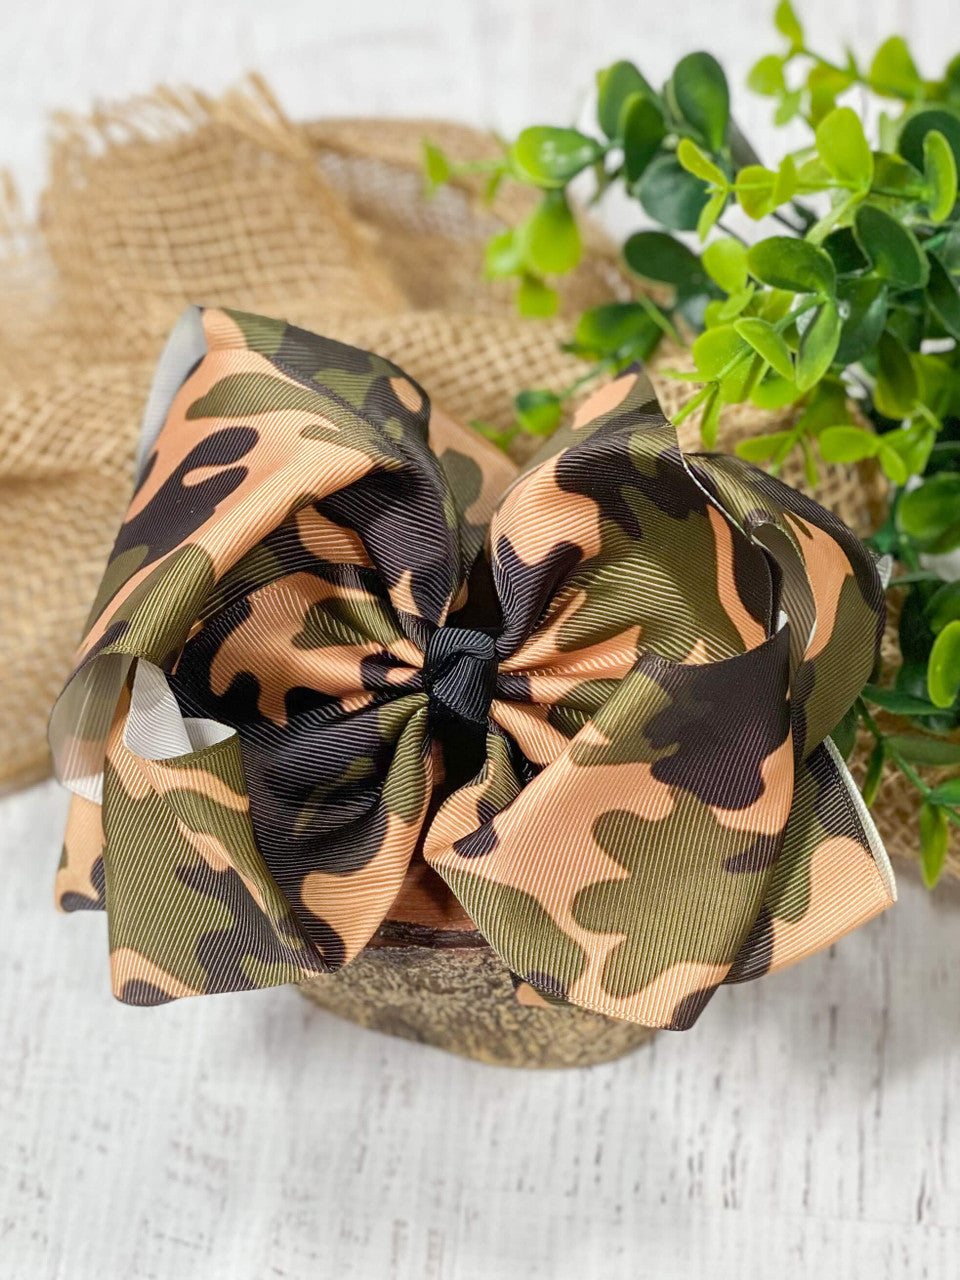 A large double looped grosgrain ribbon hair bow in a camouflage print with a black center knot.